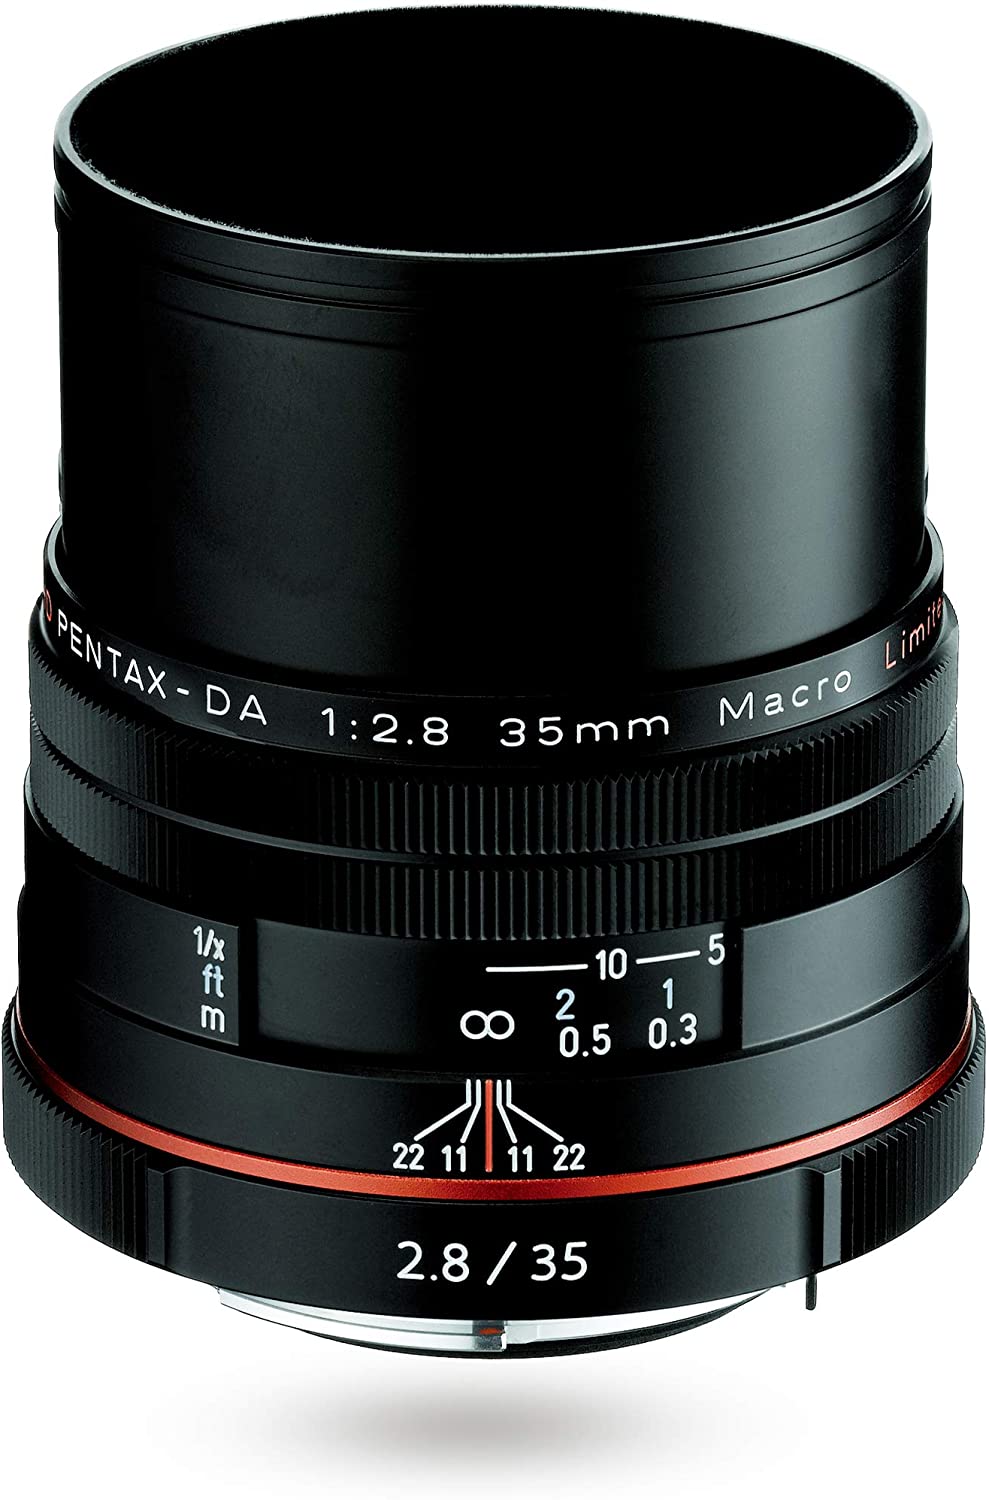 HD PENTAX-DA 35mmF2.8 Macro Limited Black 1x macro standard lens, DA limited  lens series, machined aluminum body, compact and lightweight design, APS-C  exclusive design, HD coating, with in-body image stabilization mechanism  PENTAX